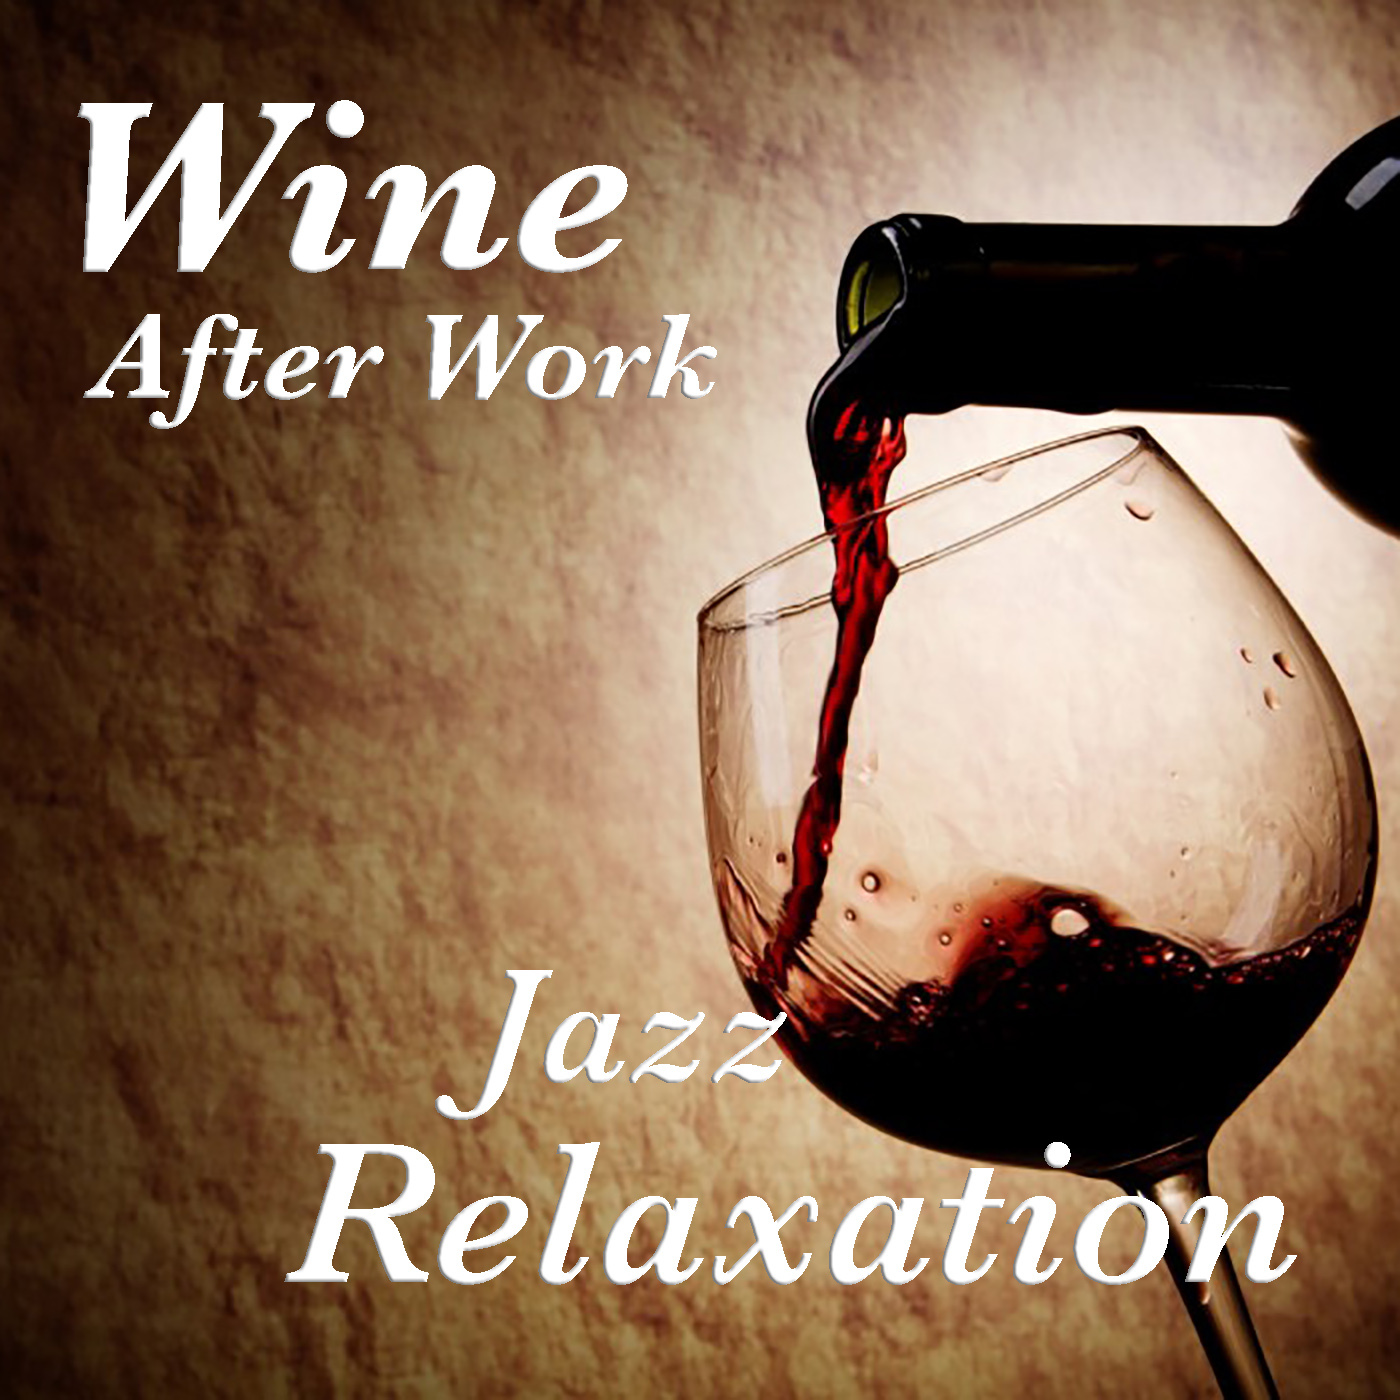 Wine After Work Jazz Relaxation